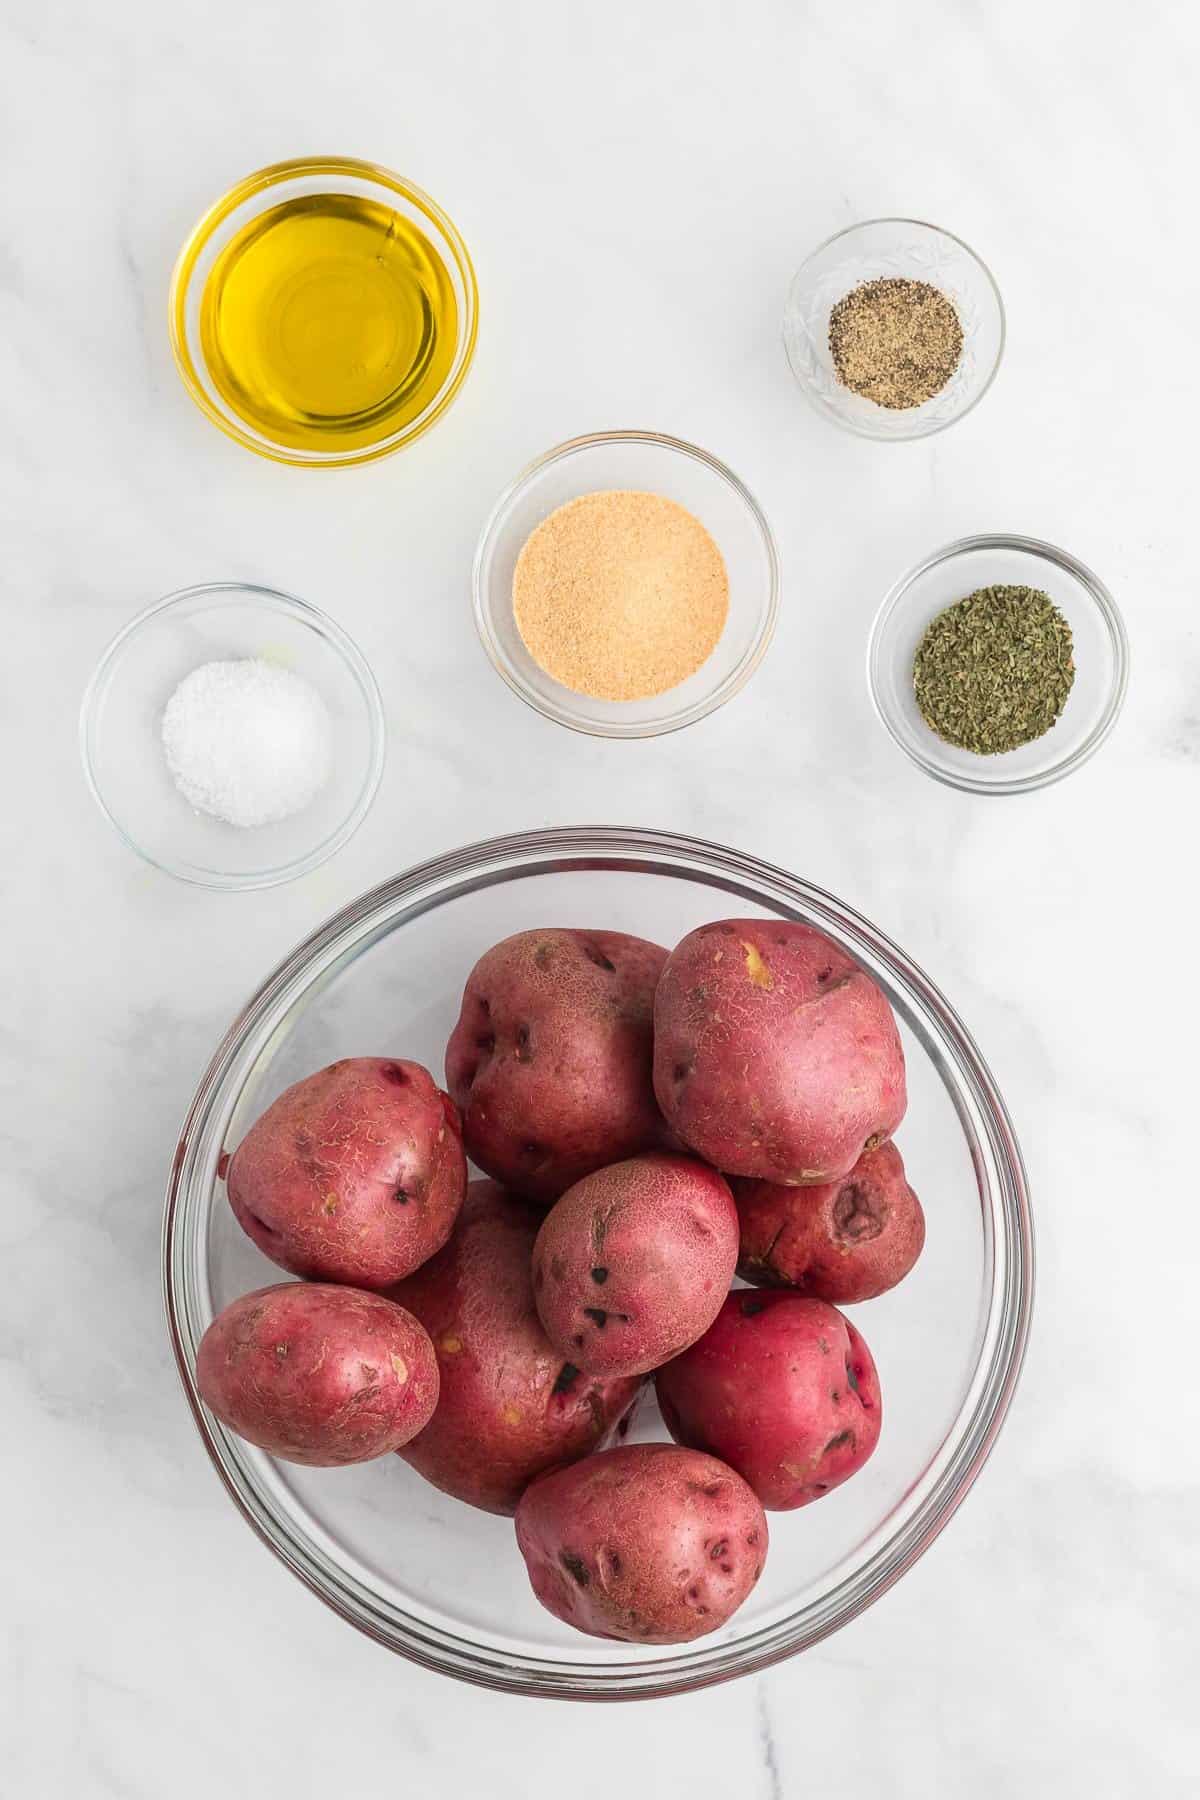 ingredients to make roasted red potatoes